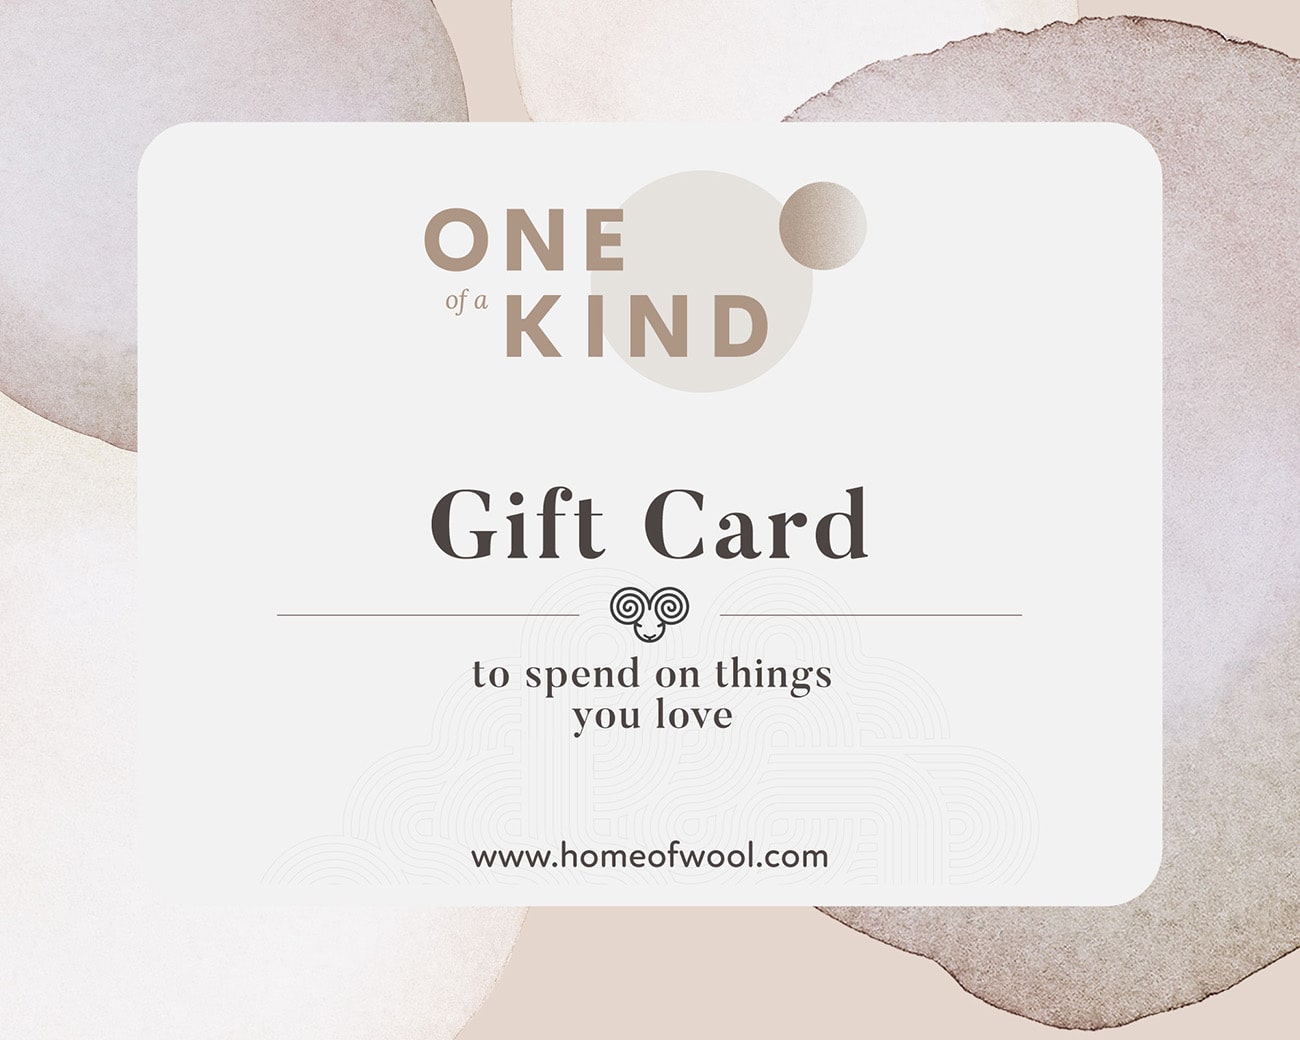 Gift Card / Gift Voucher for Home of Wool | Home of Wool | All Natural  Mattresses, Bedding & Decor